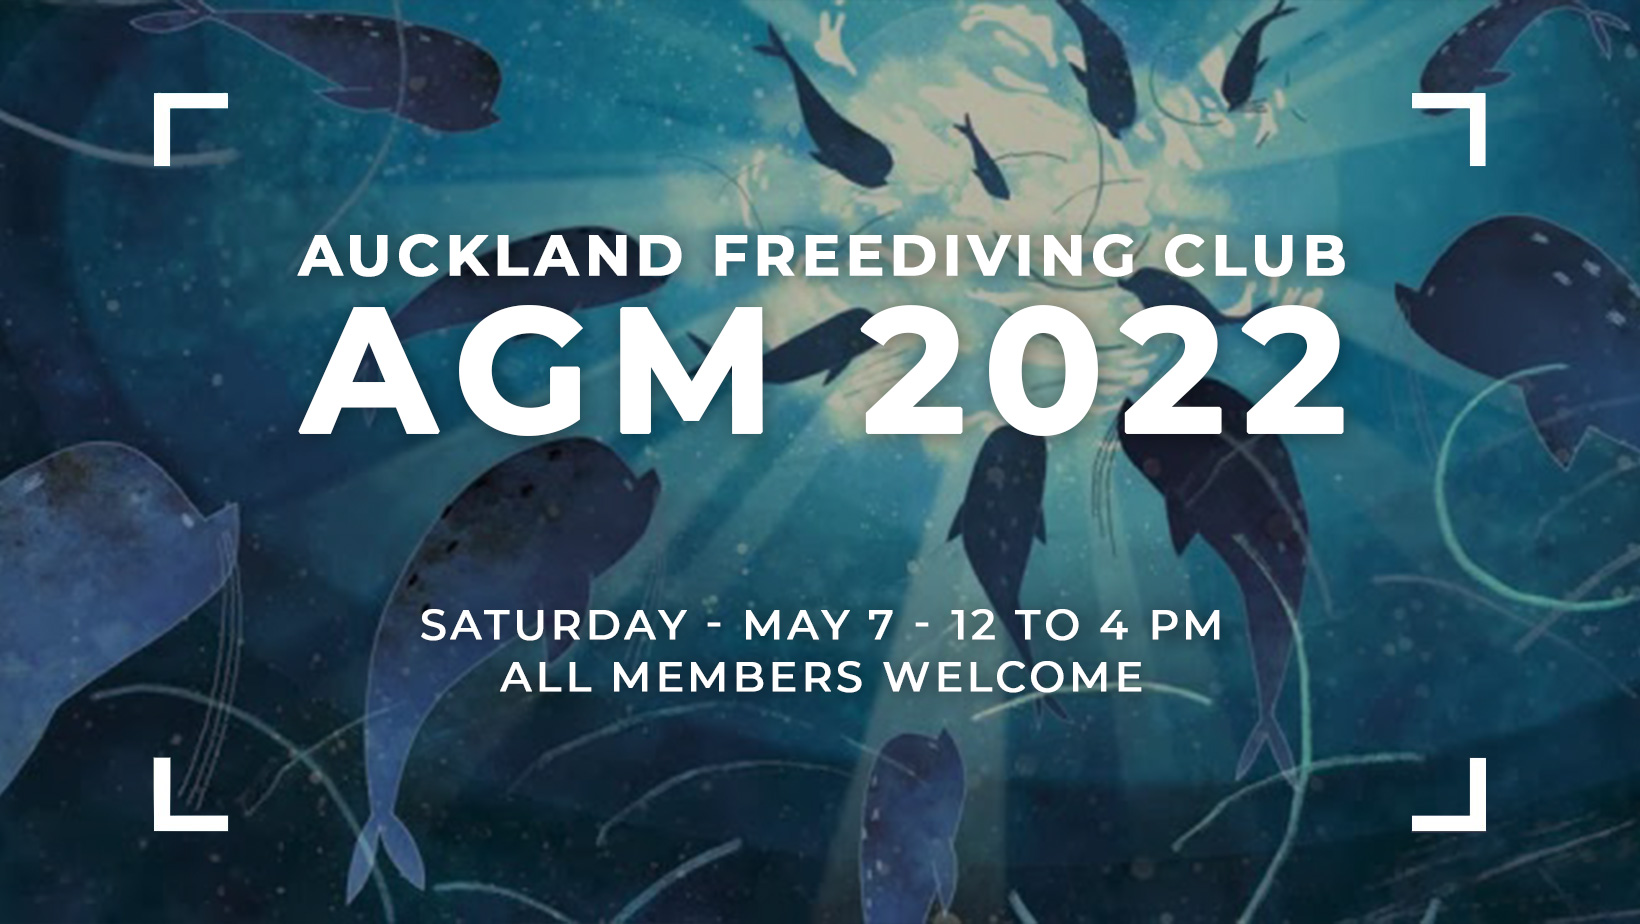 Get ready for the AGM 2022